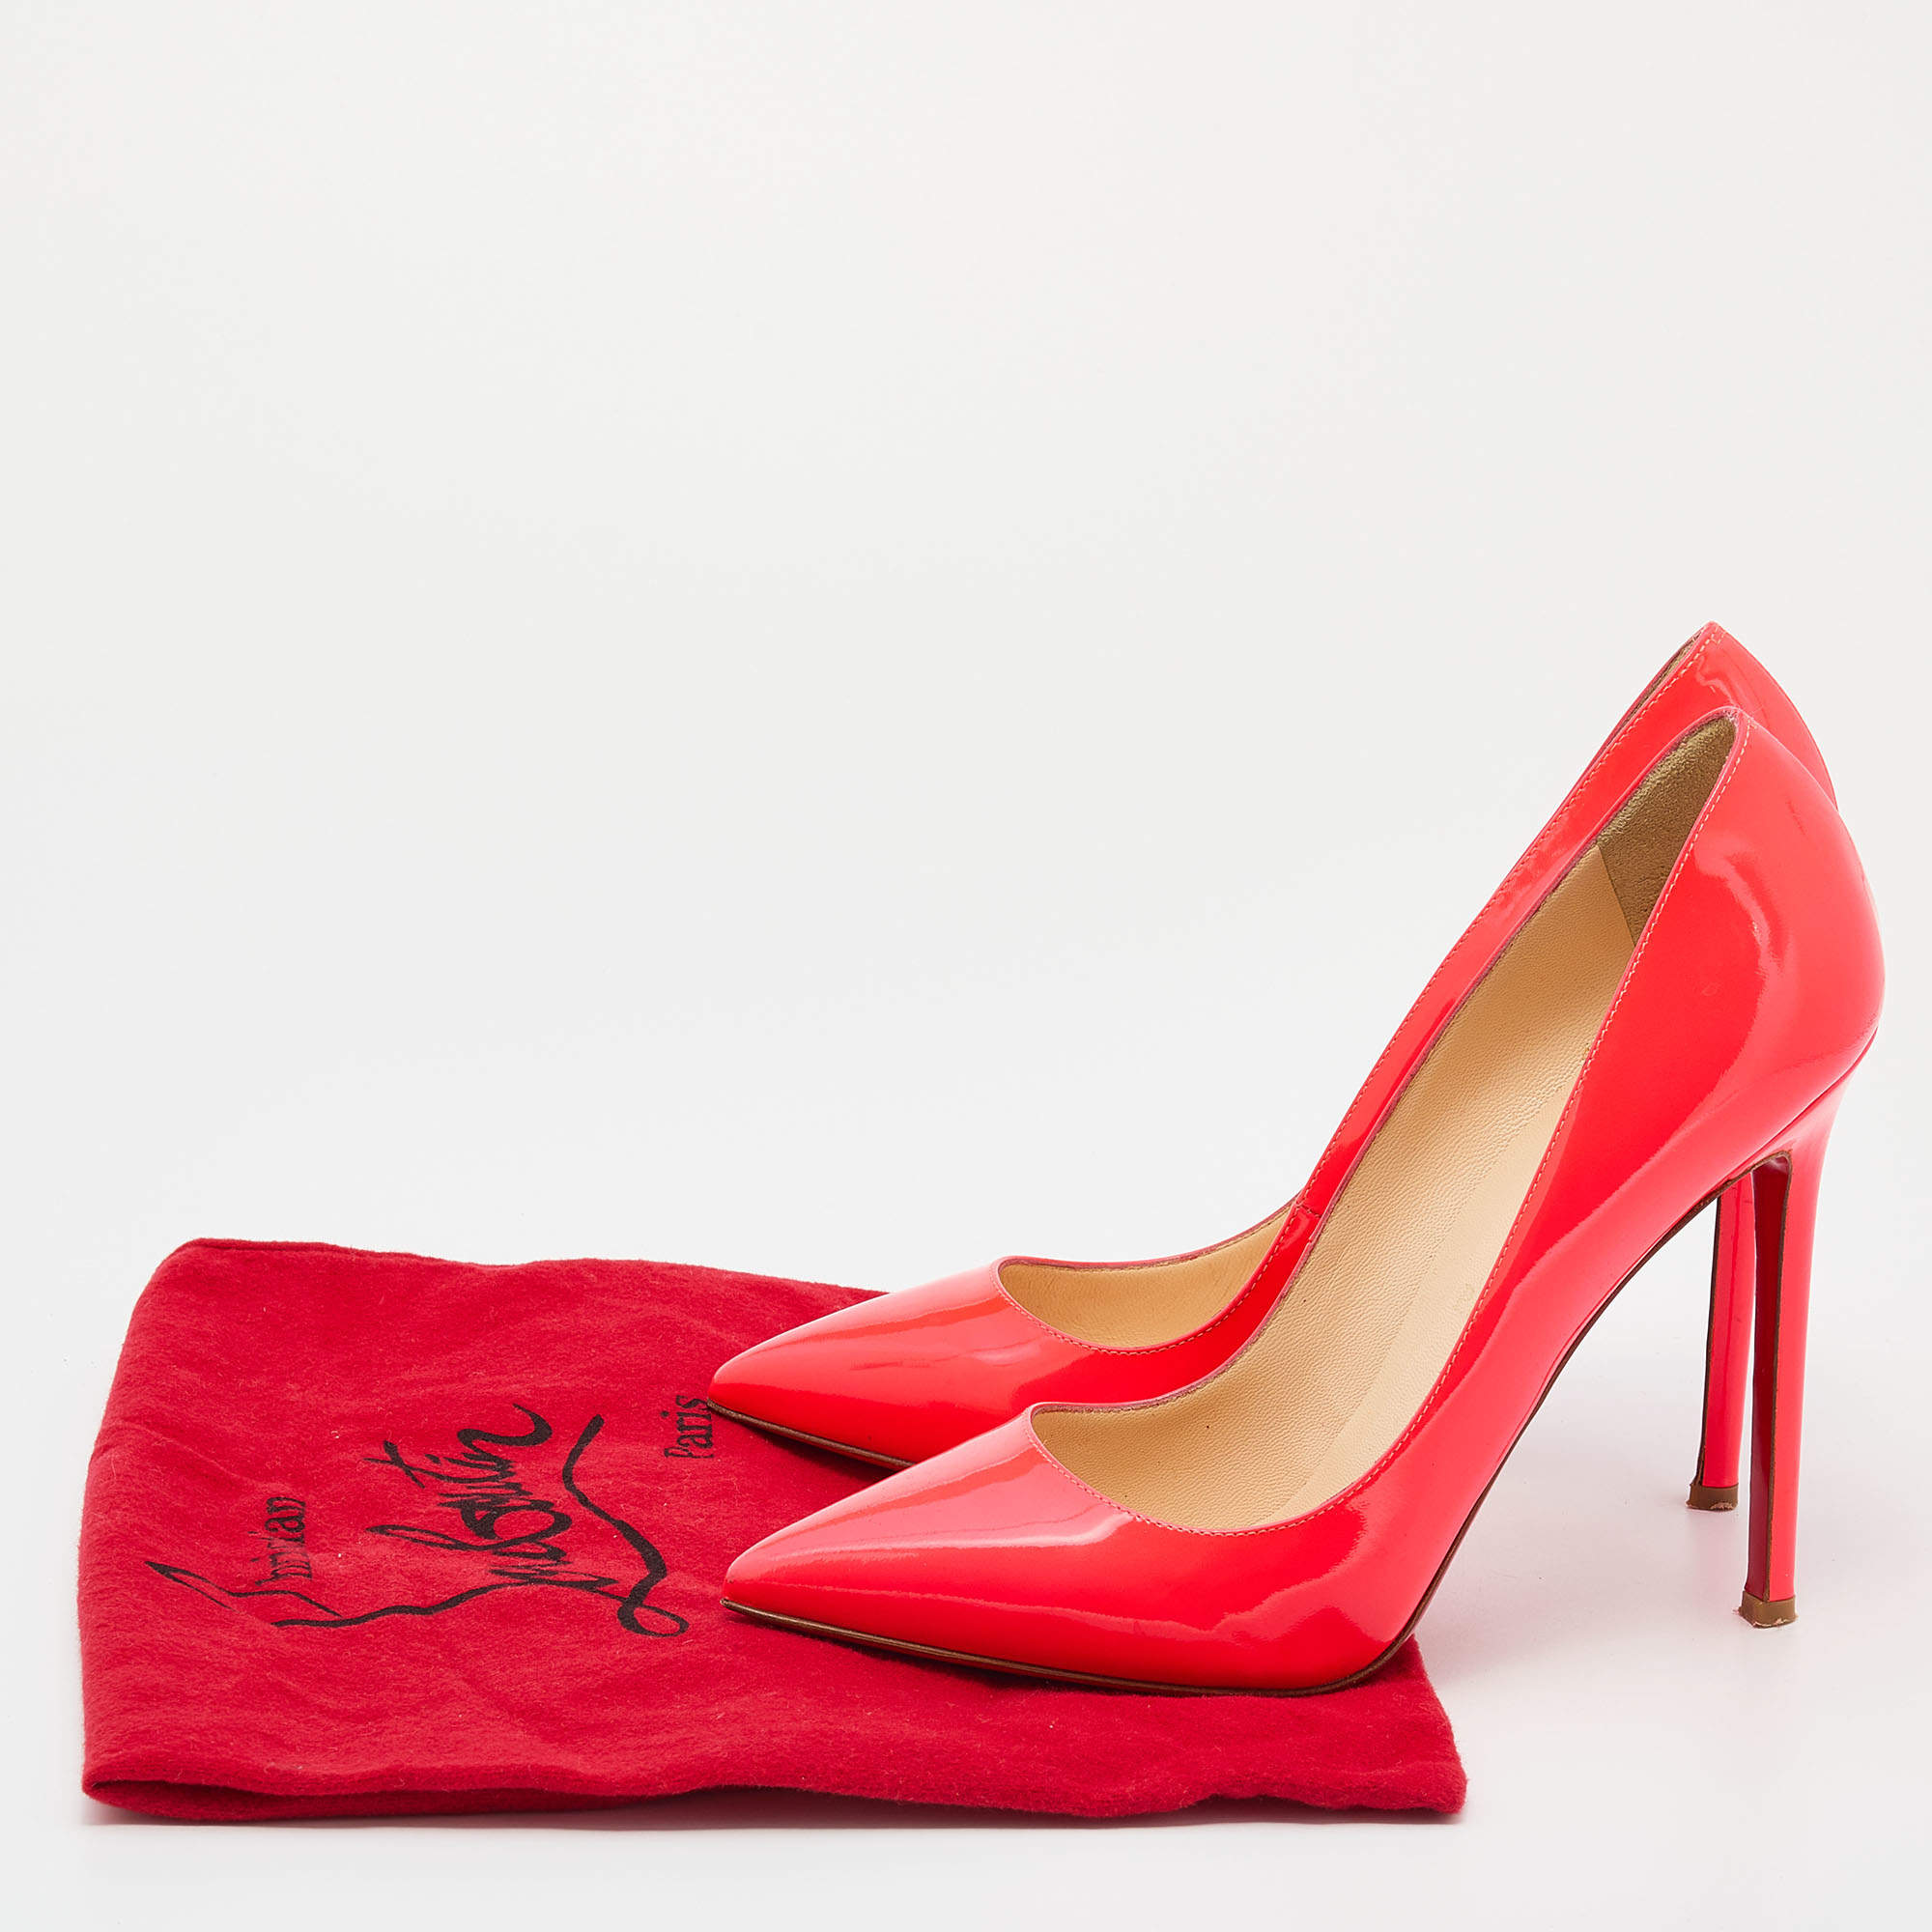 CHRISTIAN LOUBOUTIN Patent So Kate Pumps in Fire Coral (36.5) - More Than  You Can Imagine